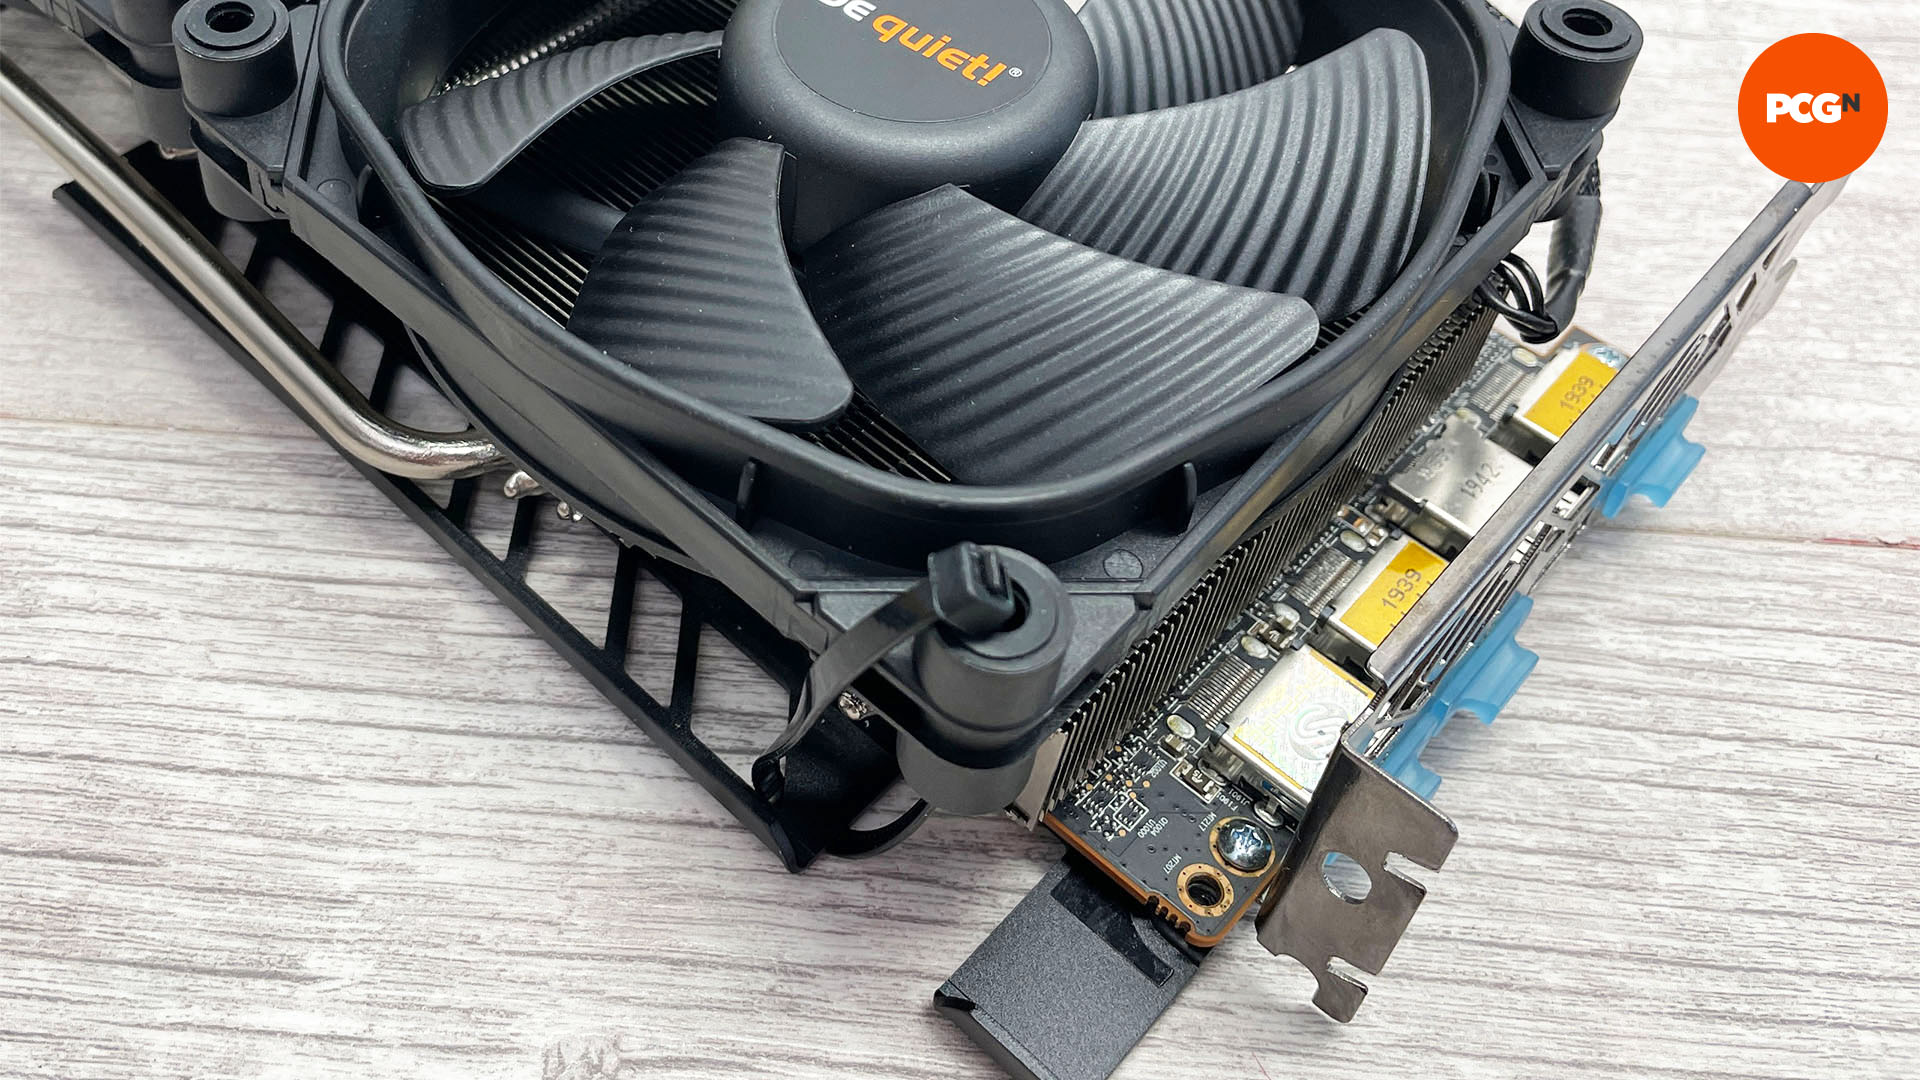 How to lower GPU temp: Secure fans to graphics card with cable ties